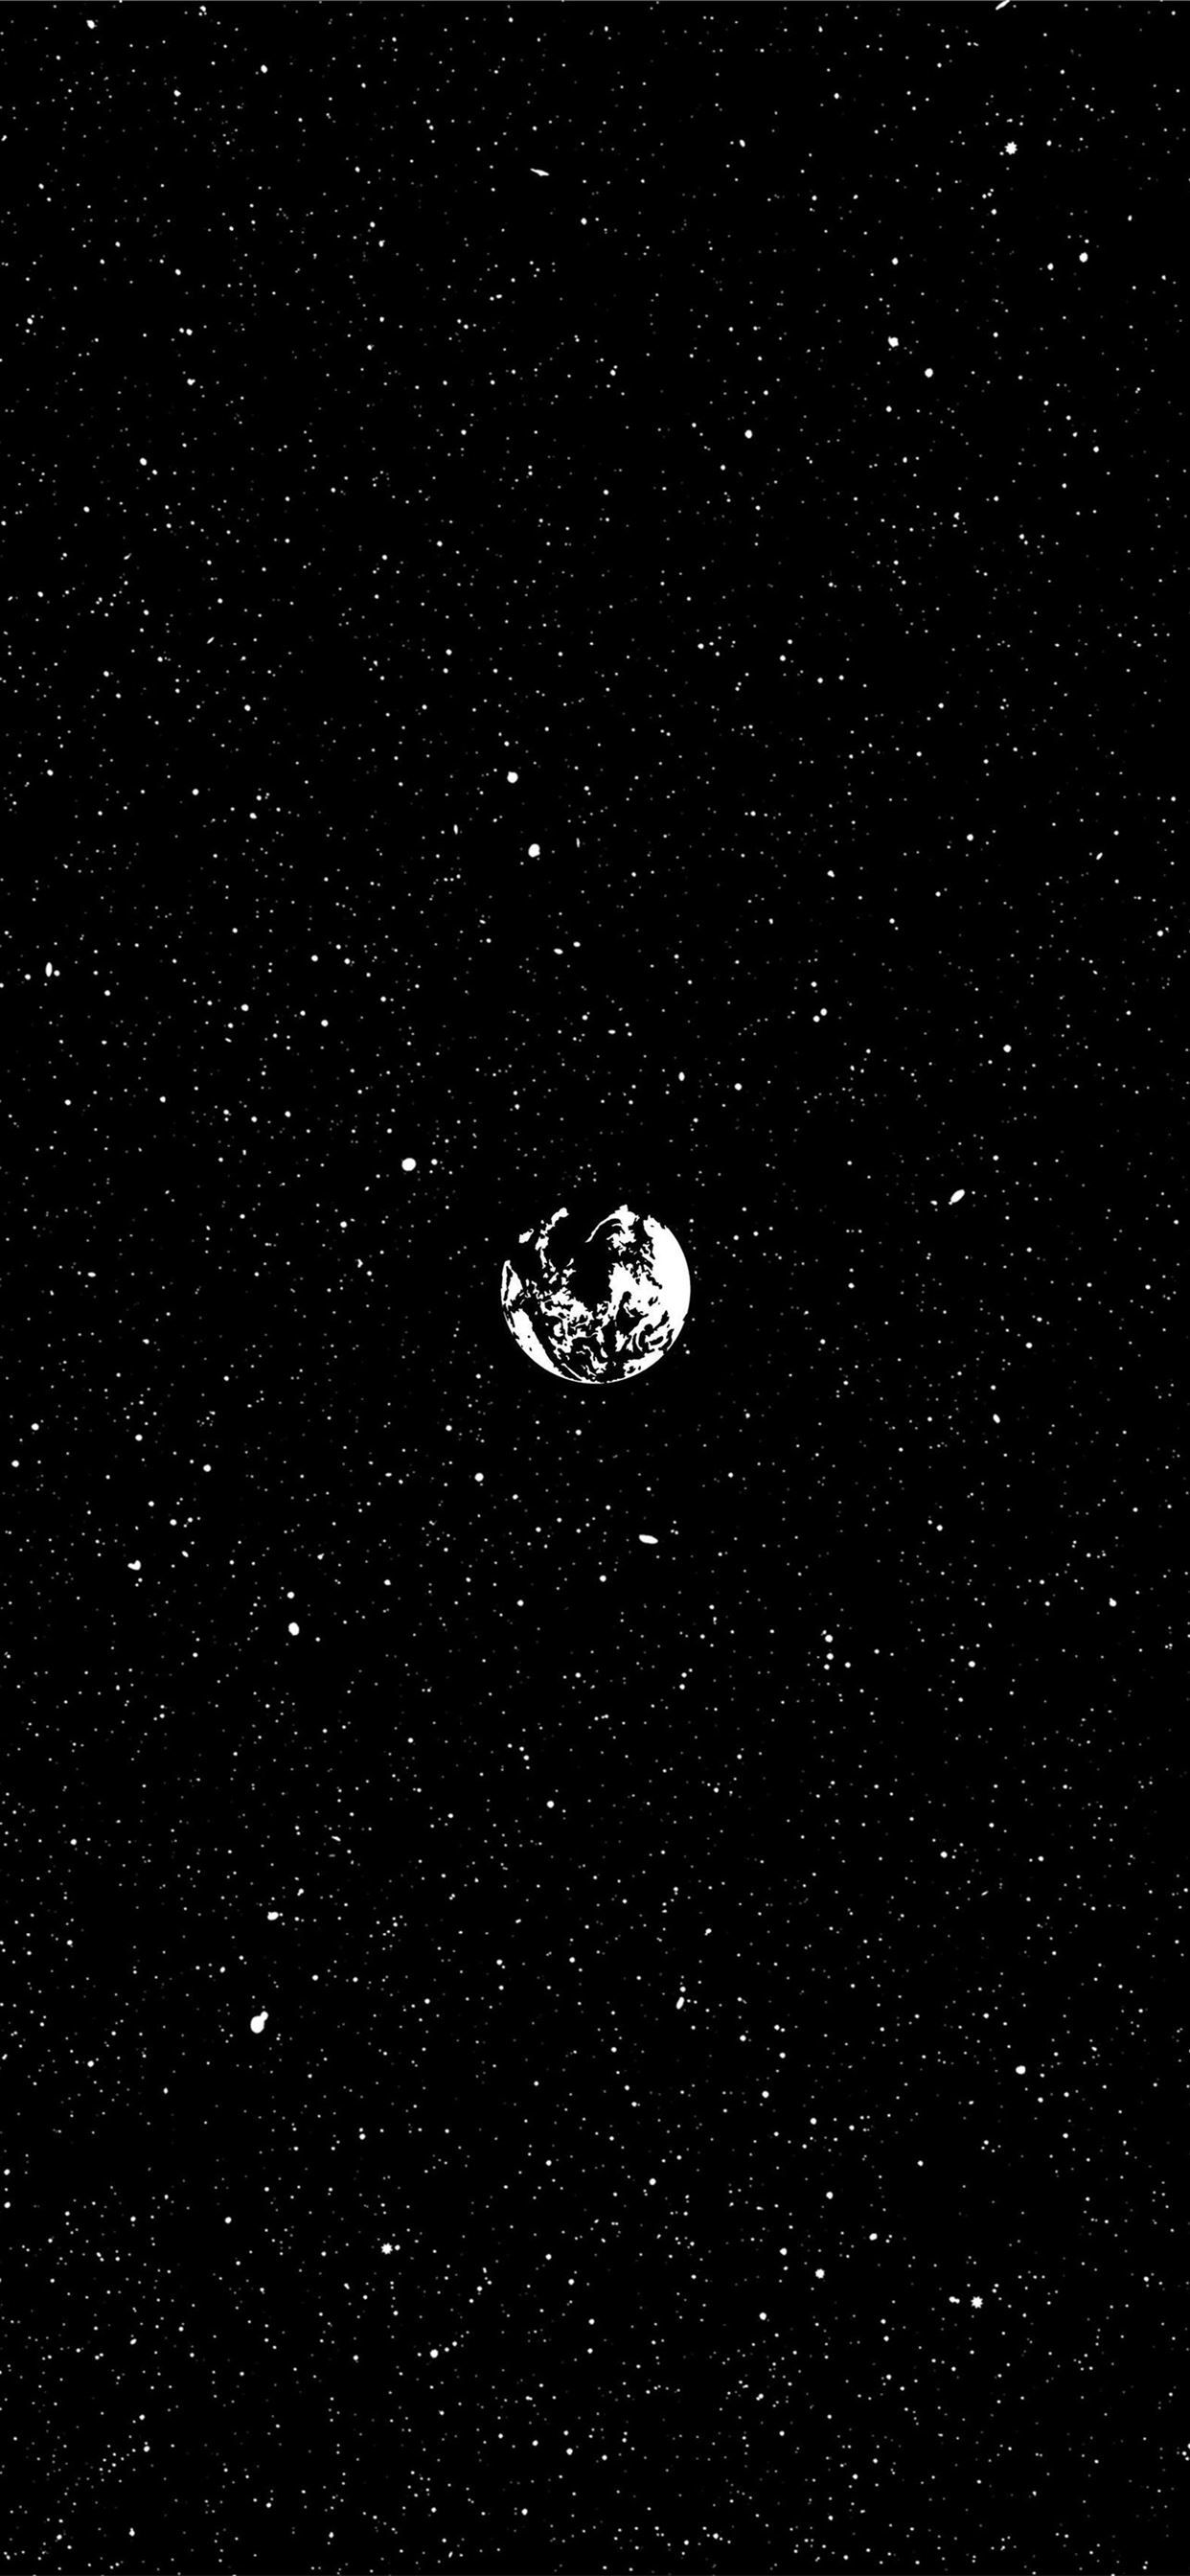 A black and white image of an object in space - Space